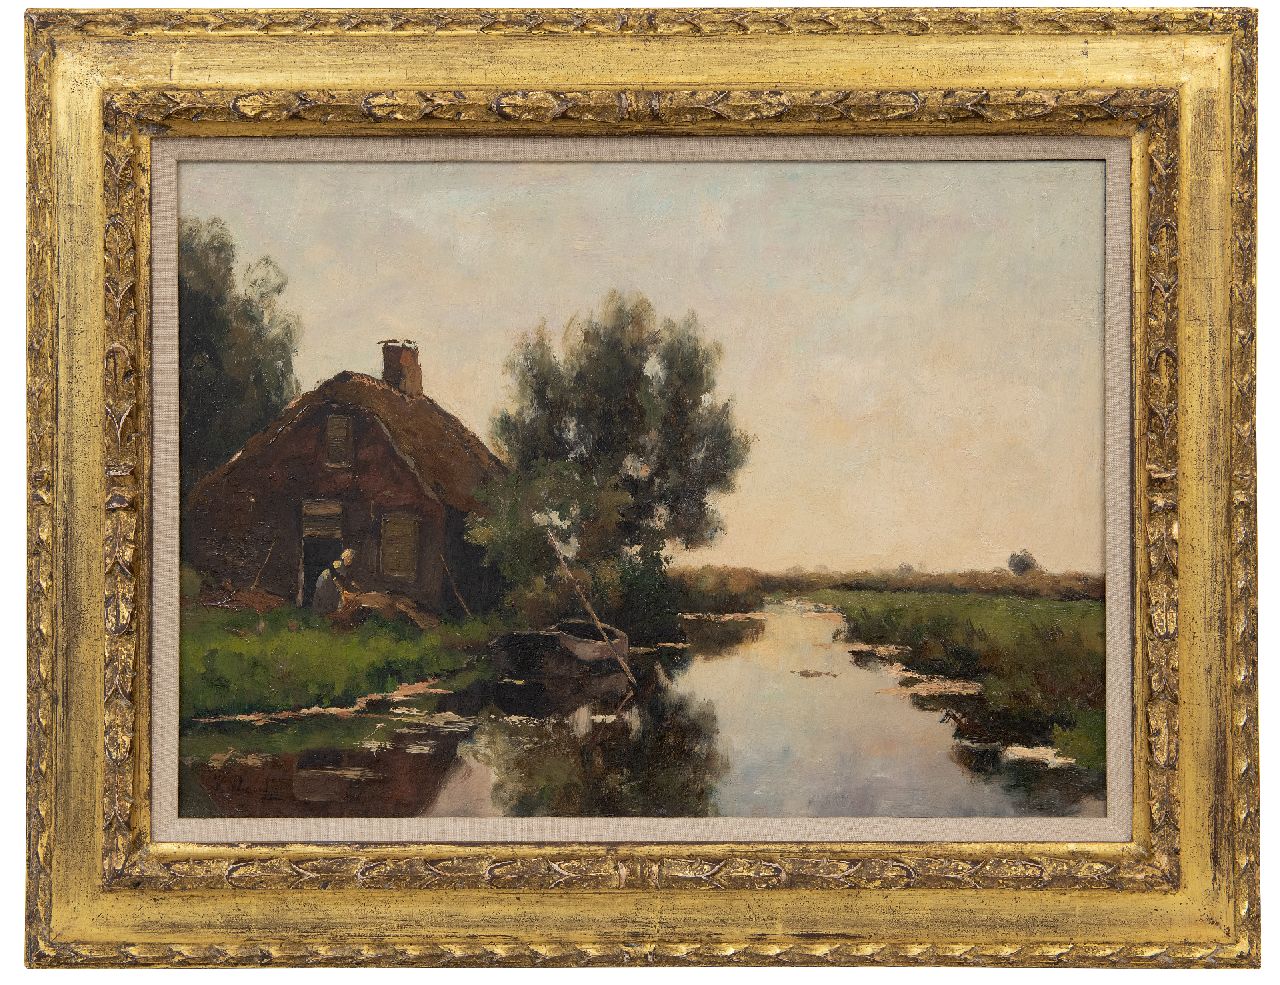 Bauffe V.  | Victor Bauffe | Paintings offered for sale | Windmill on a polder canal, oil on canvas 35.4 x 50.0 cm, signed l.l.